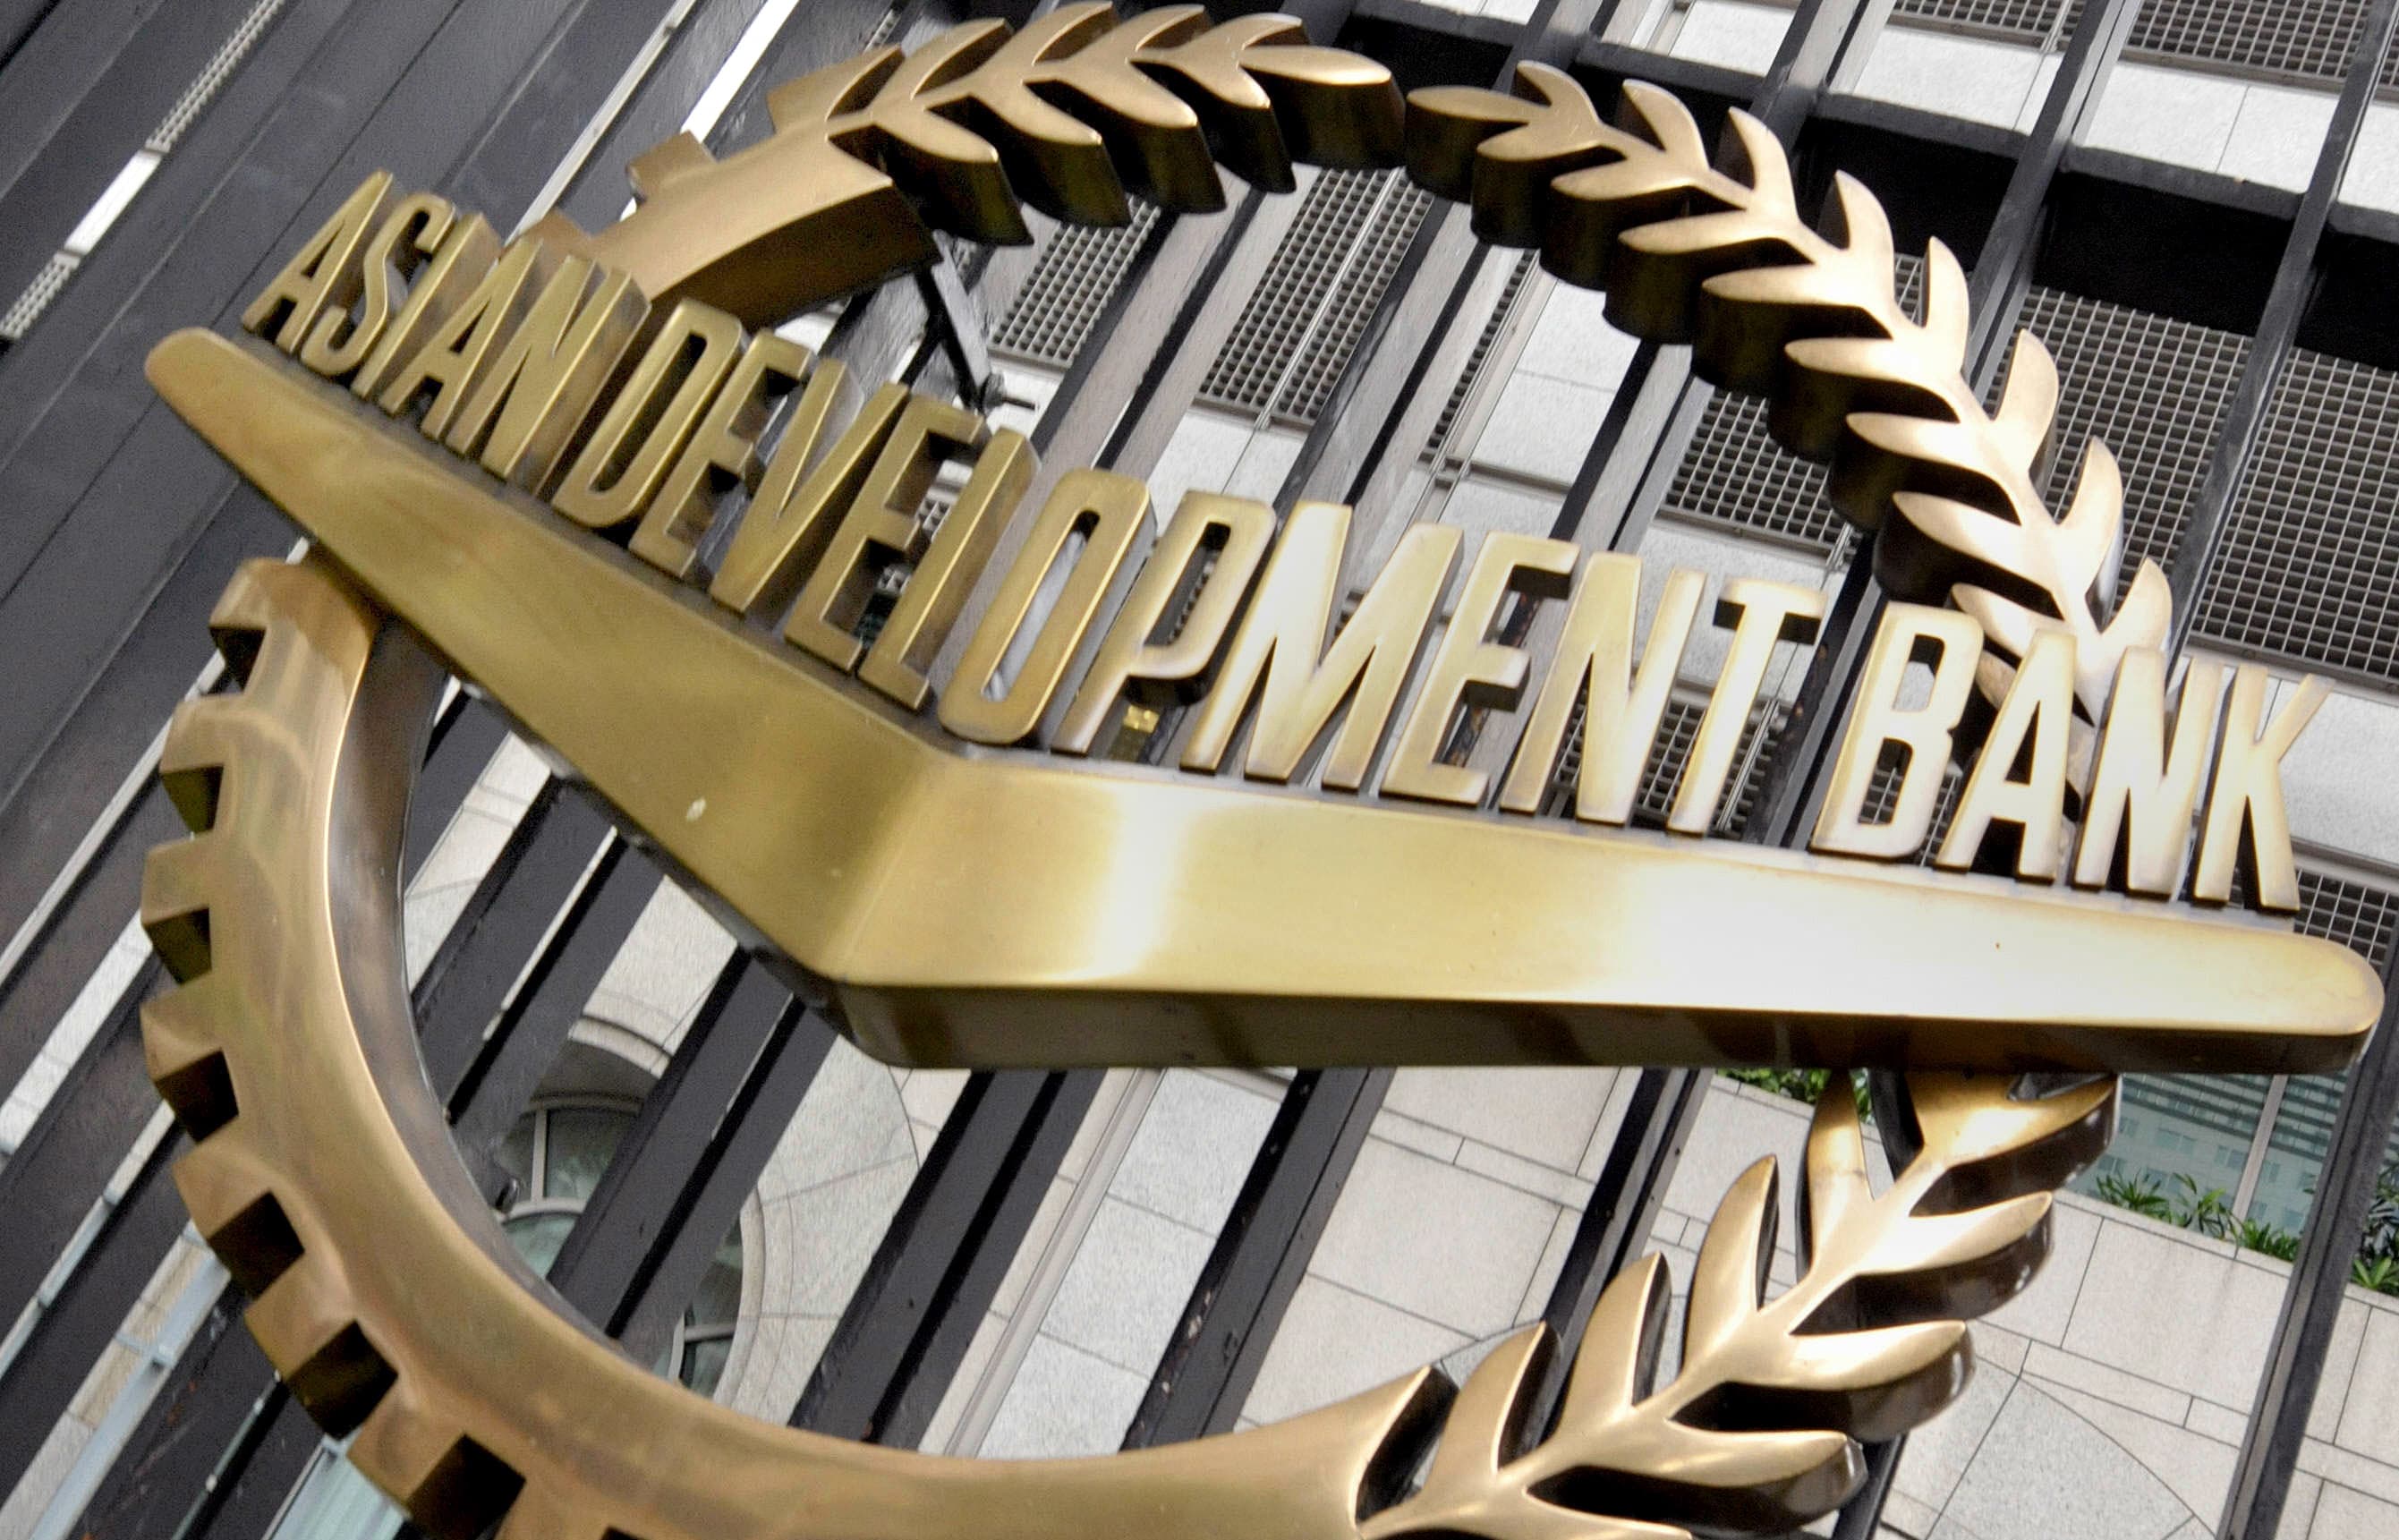 The Asian Development Bank (ADB) is an Asia regional development organization dedicated to reducing poverty in Asia and the Pacific.